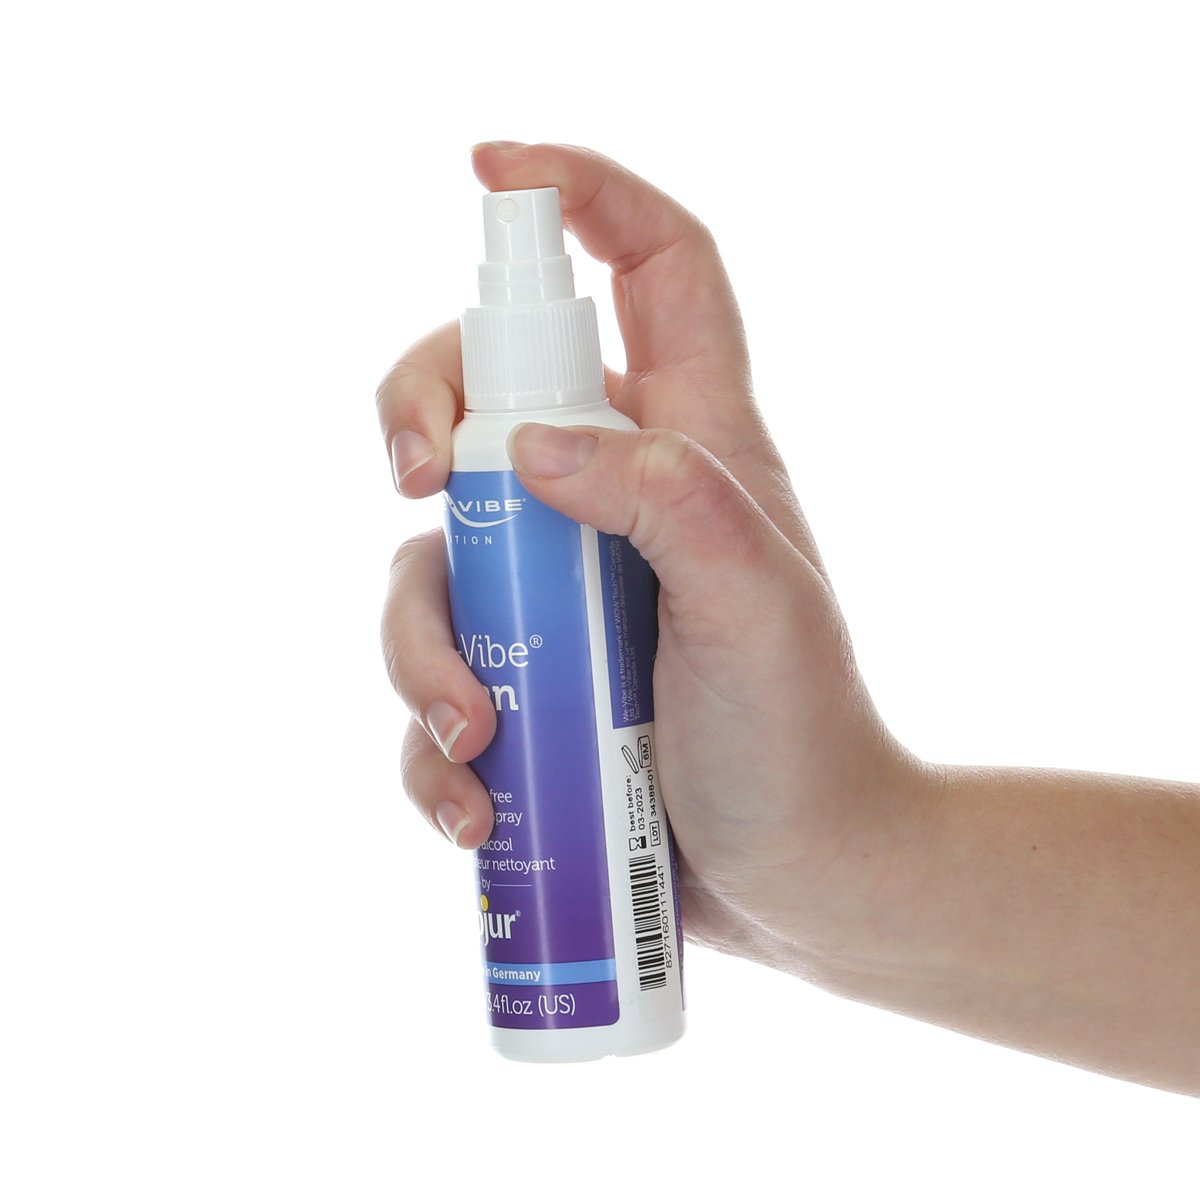 We-Vibe Alcohol-free Cleaning Spray - 3.4 oz